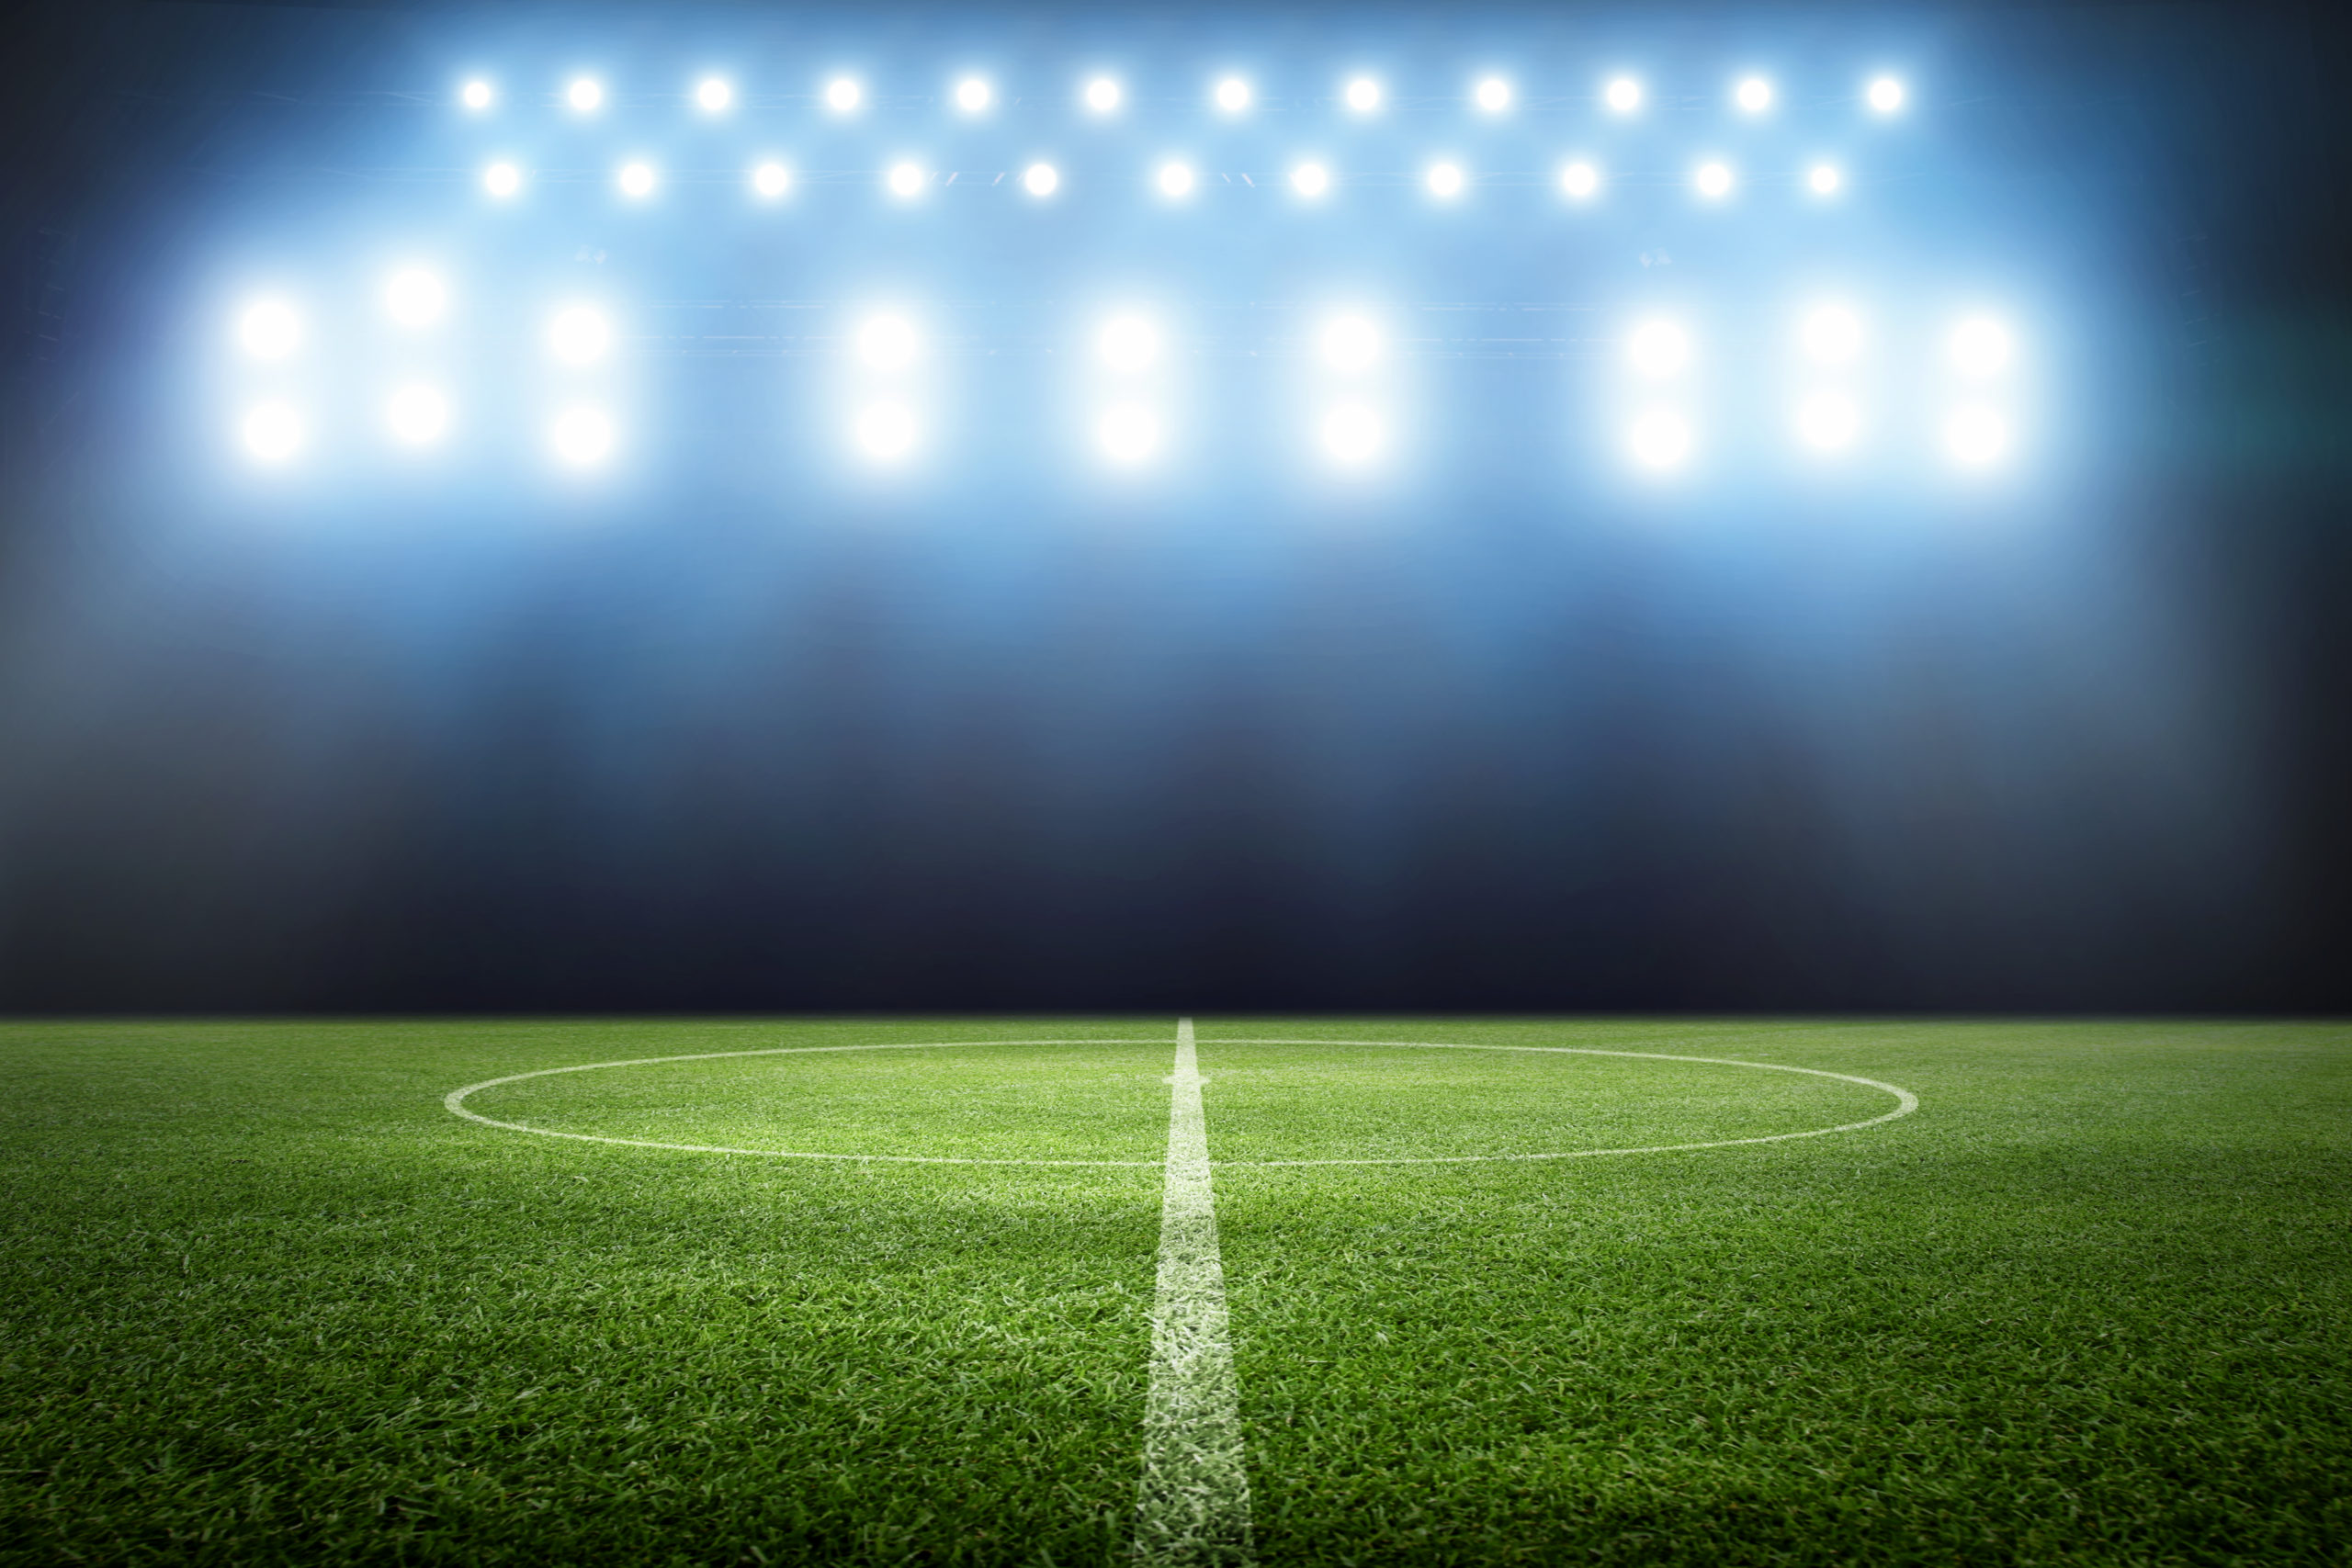 Football stadium, shiny lights, view from field. Soccer concept